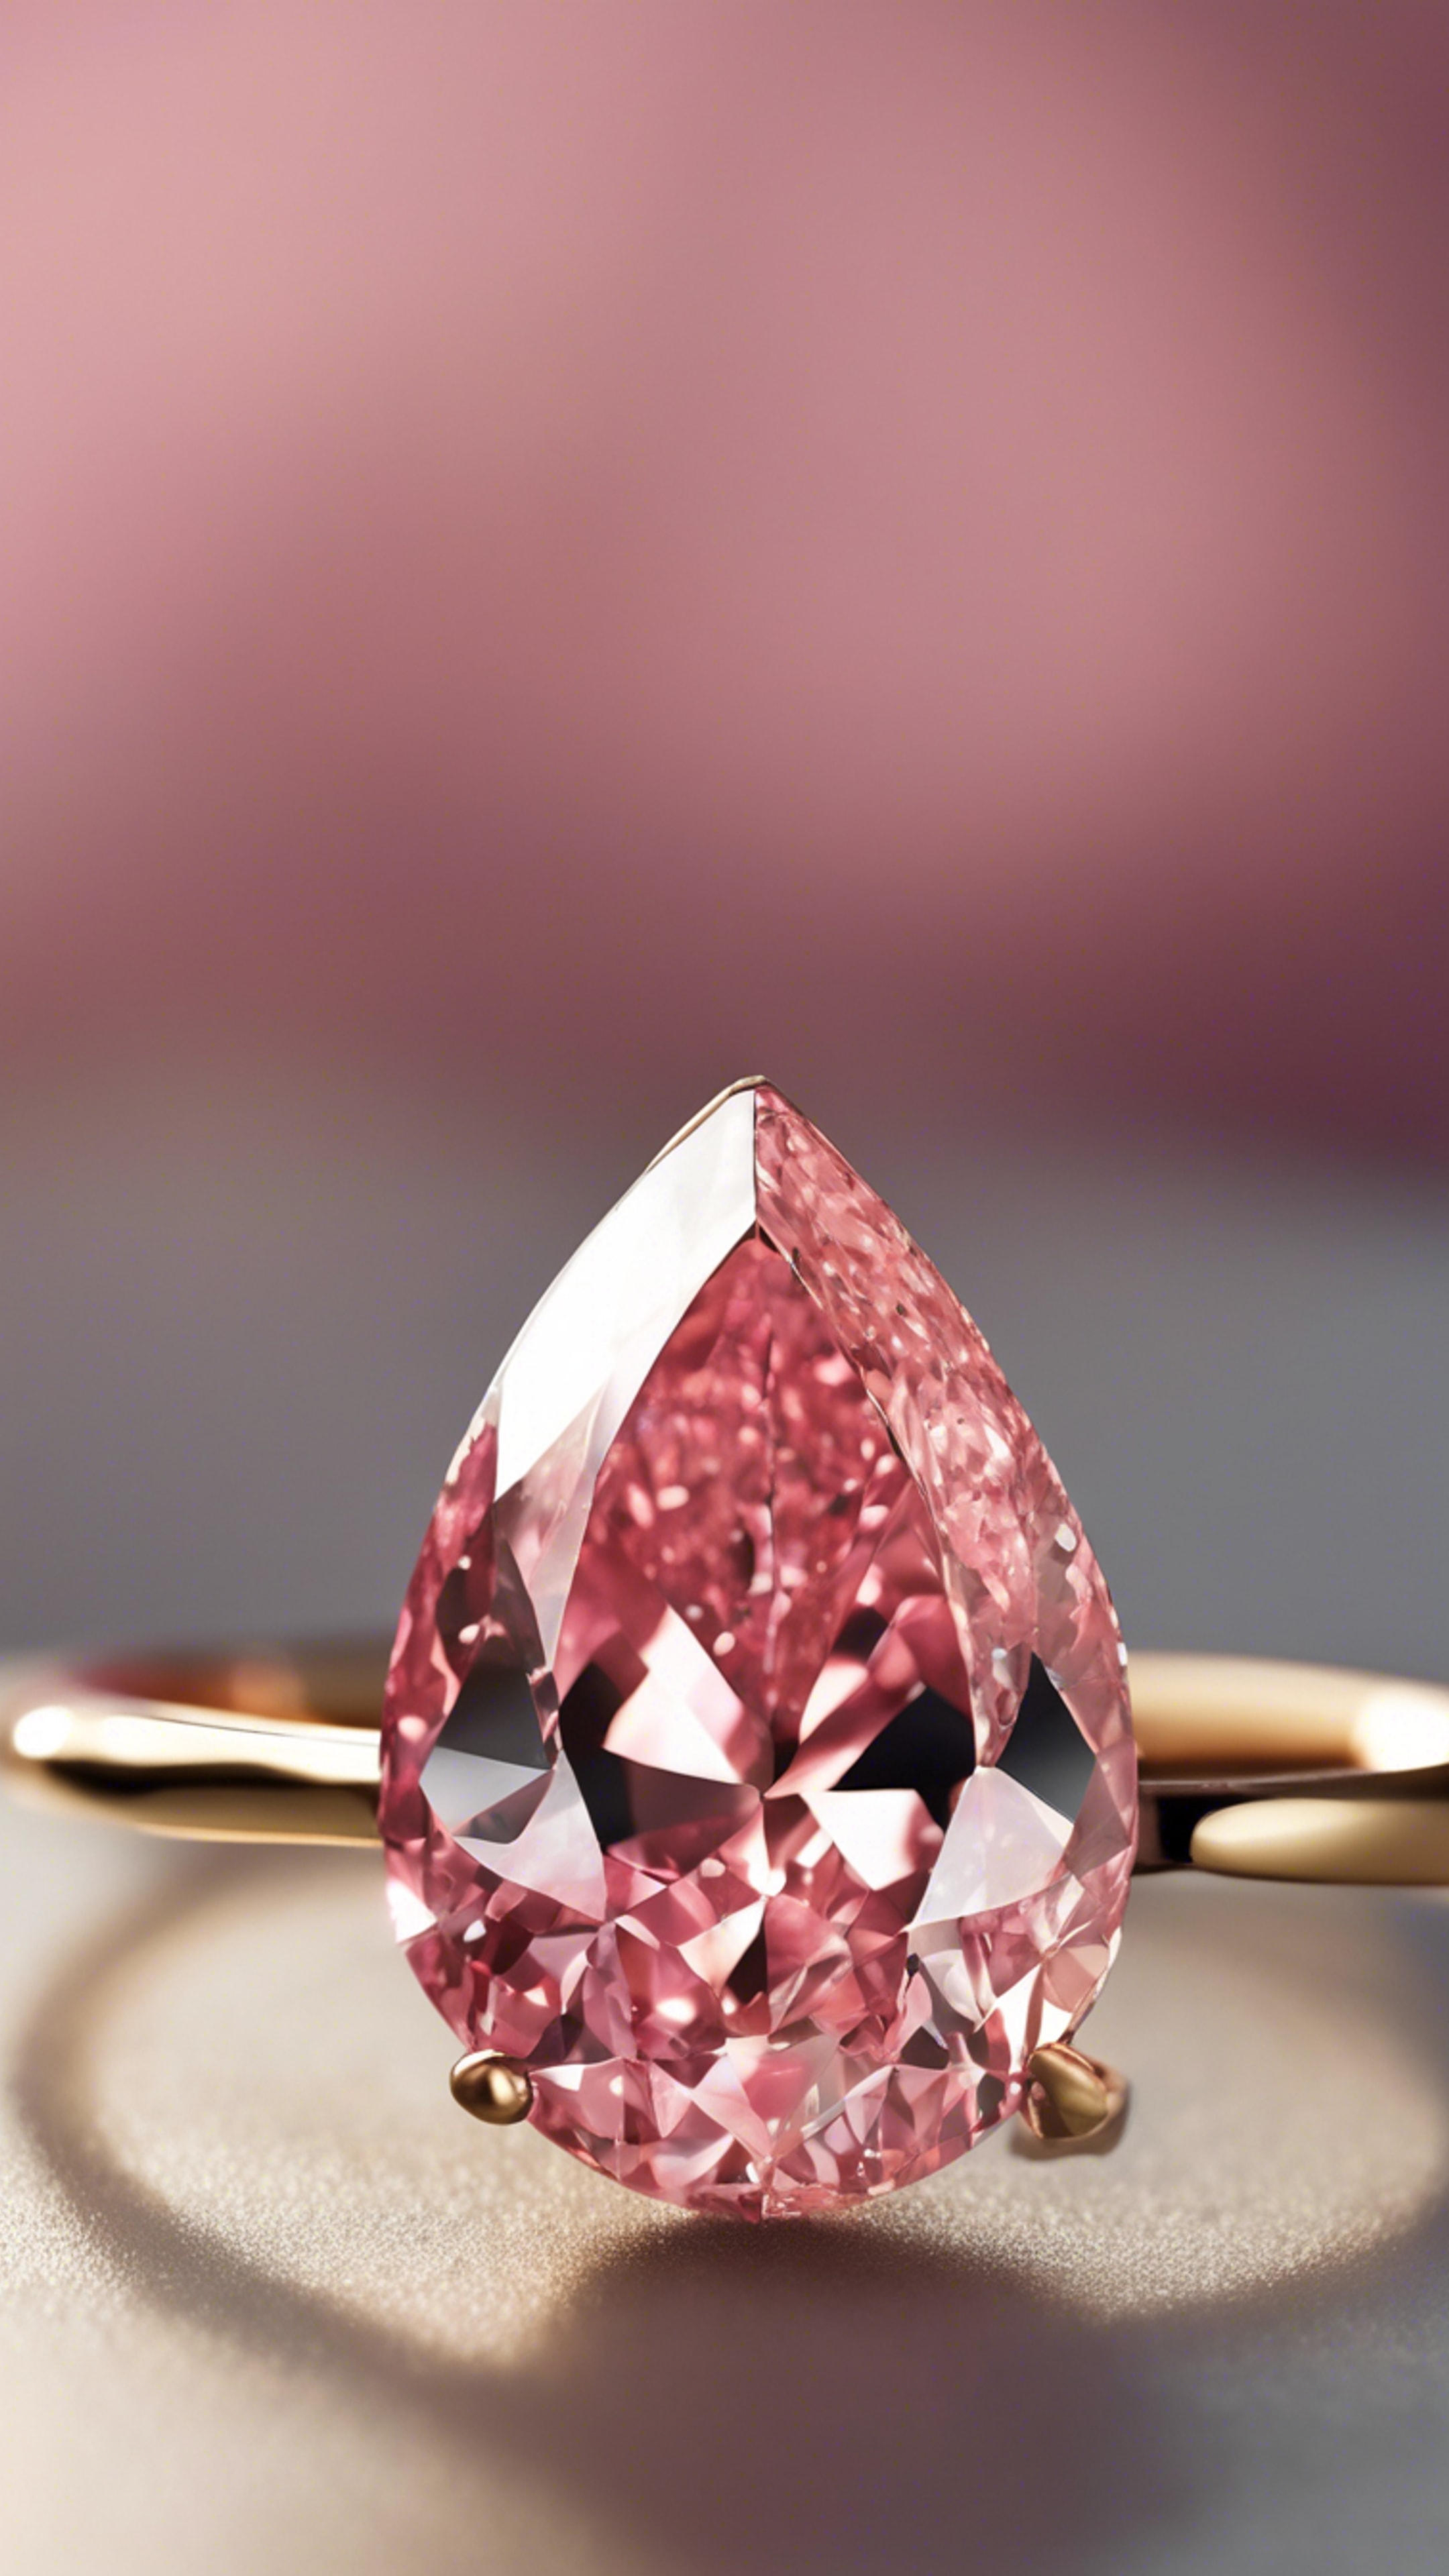 A close-up of a pink pear-shaped diamond on a simple gold band. Tapetai[930f75676b4b4a58983f]